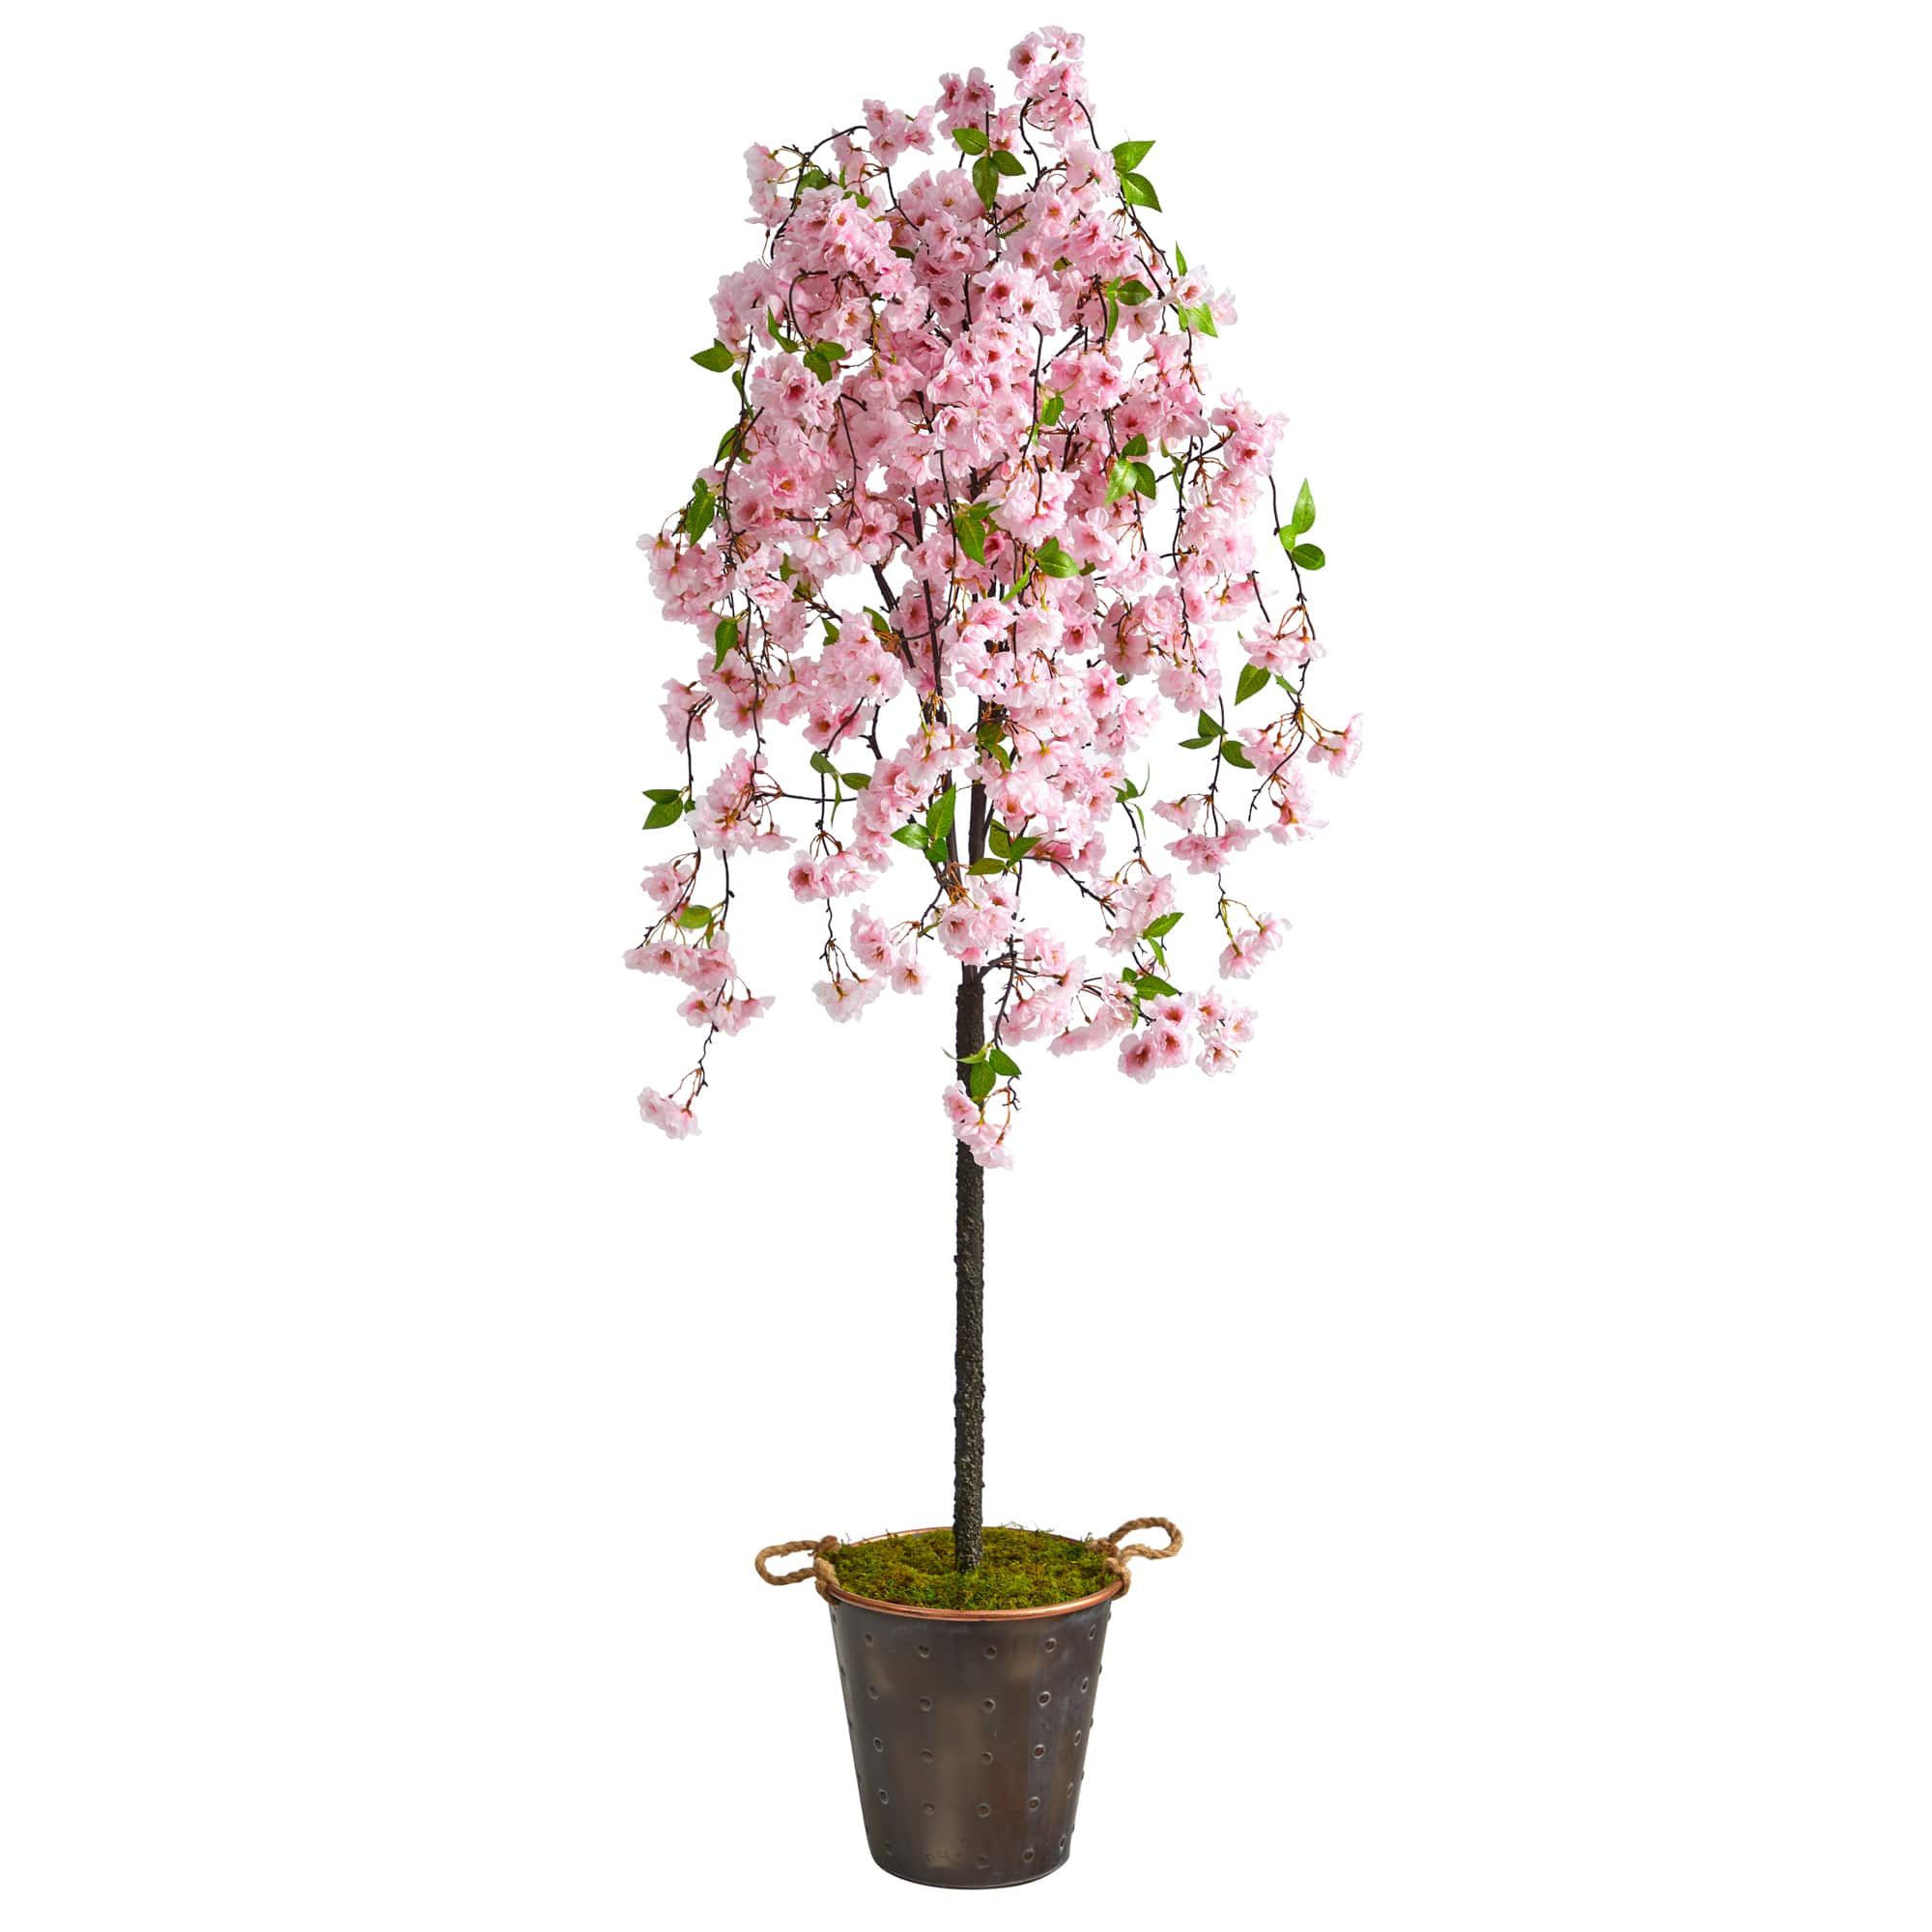 6ft. Cherry Blossom Artificial Tree in Decorative Metal Pail with Rope